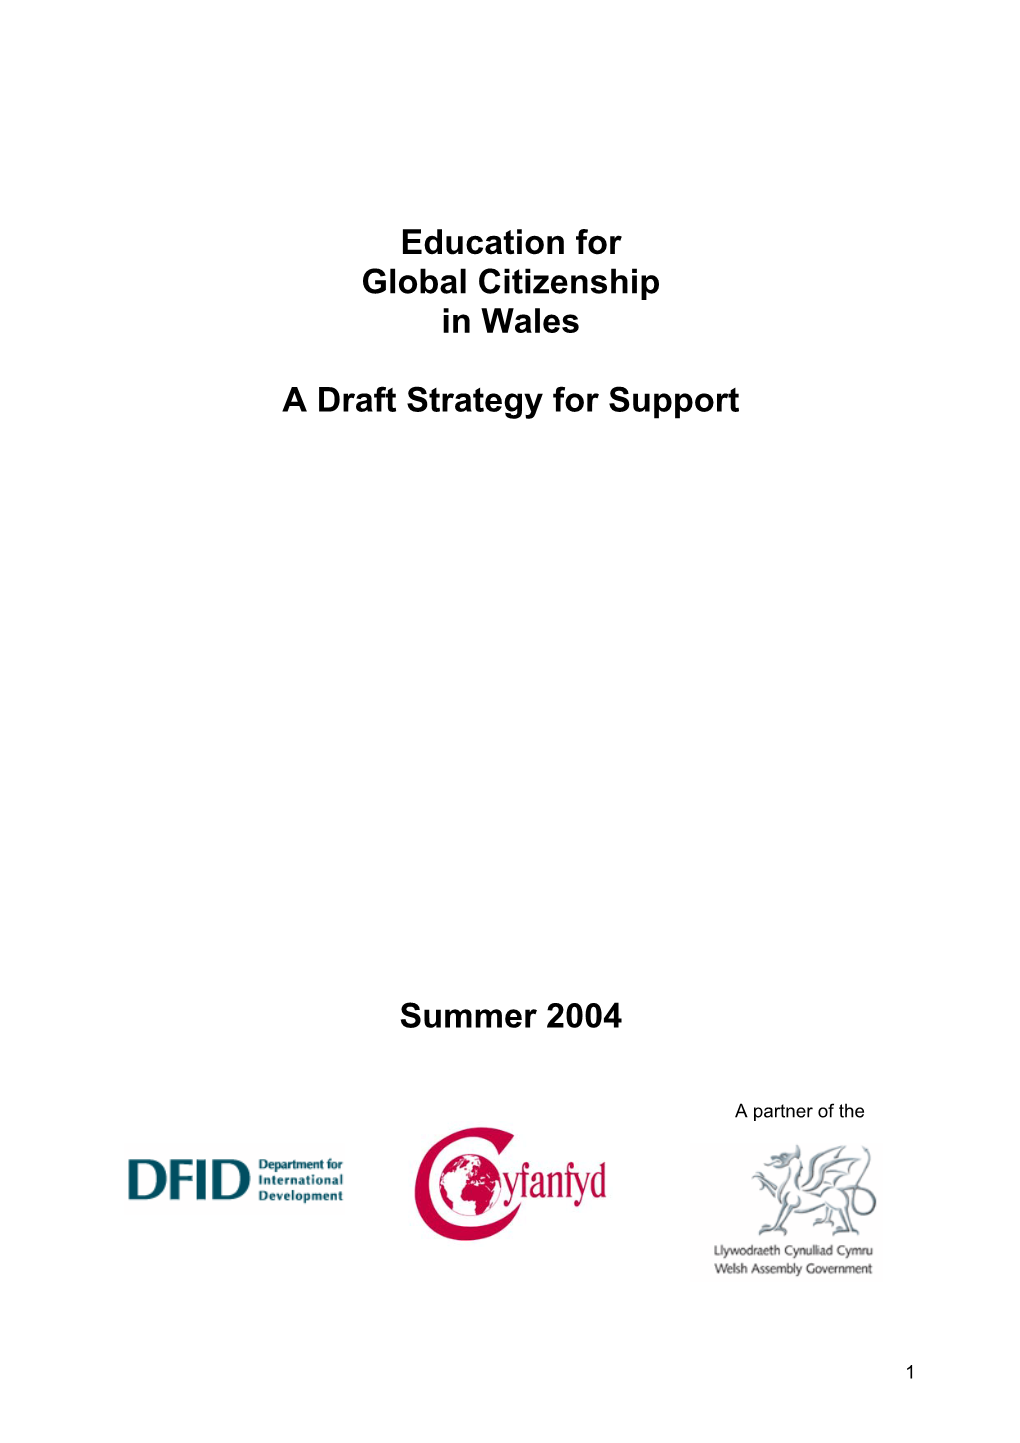 Education for Global Citizenship in Wales a Draft Strategy